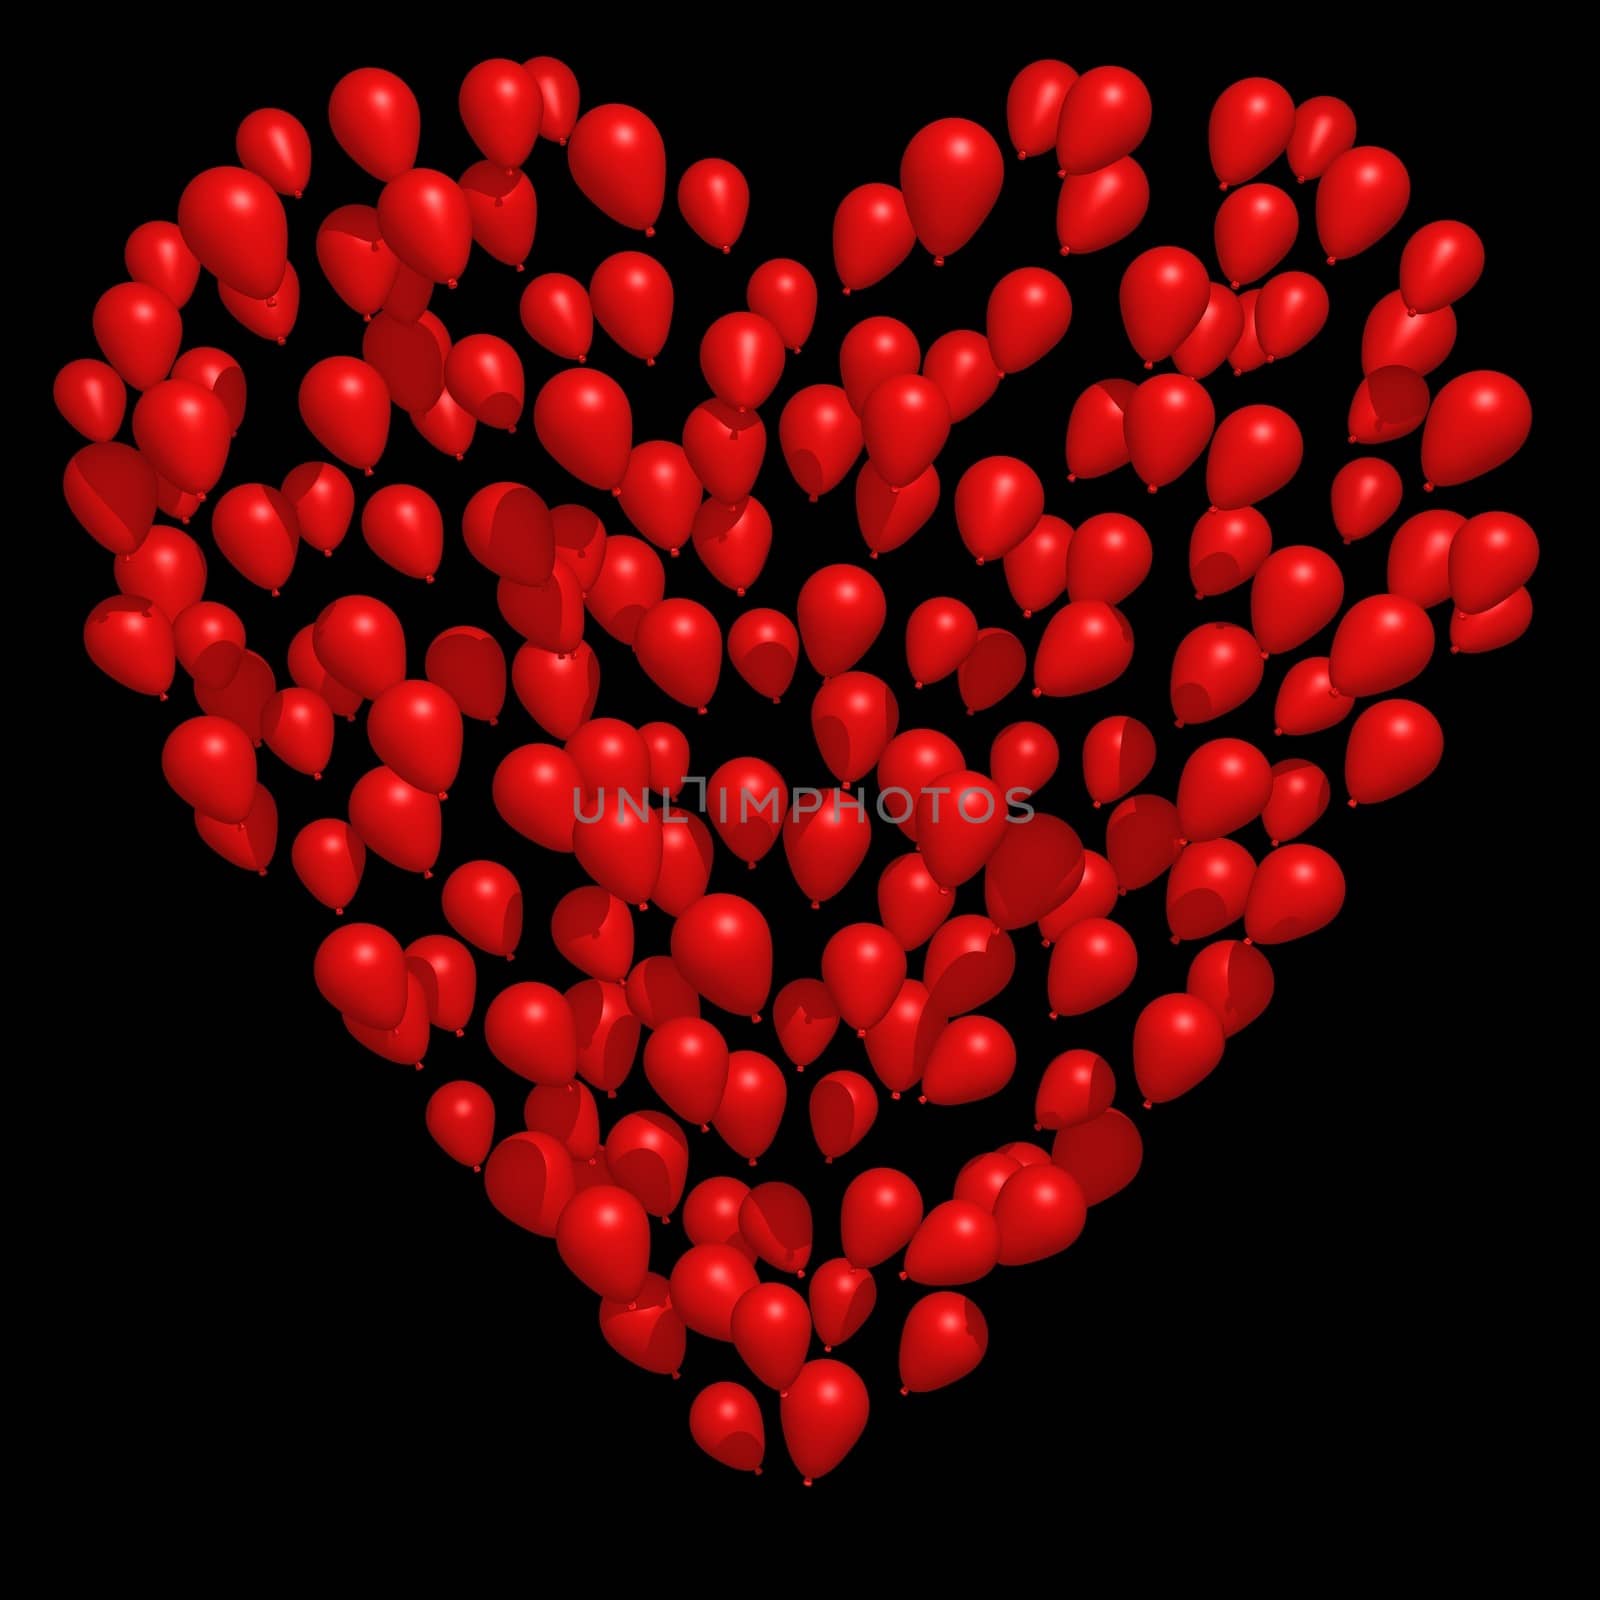 Illustration of lots of red balloons in the shape of a heart